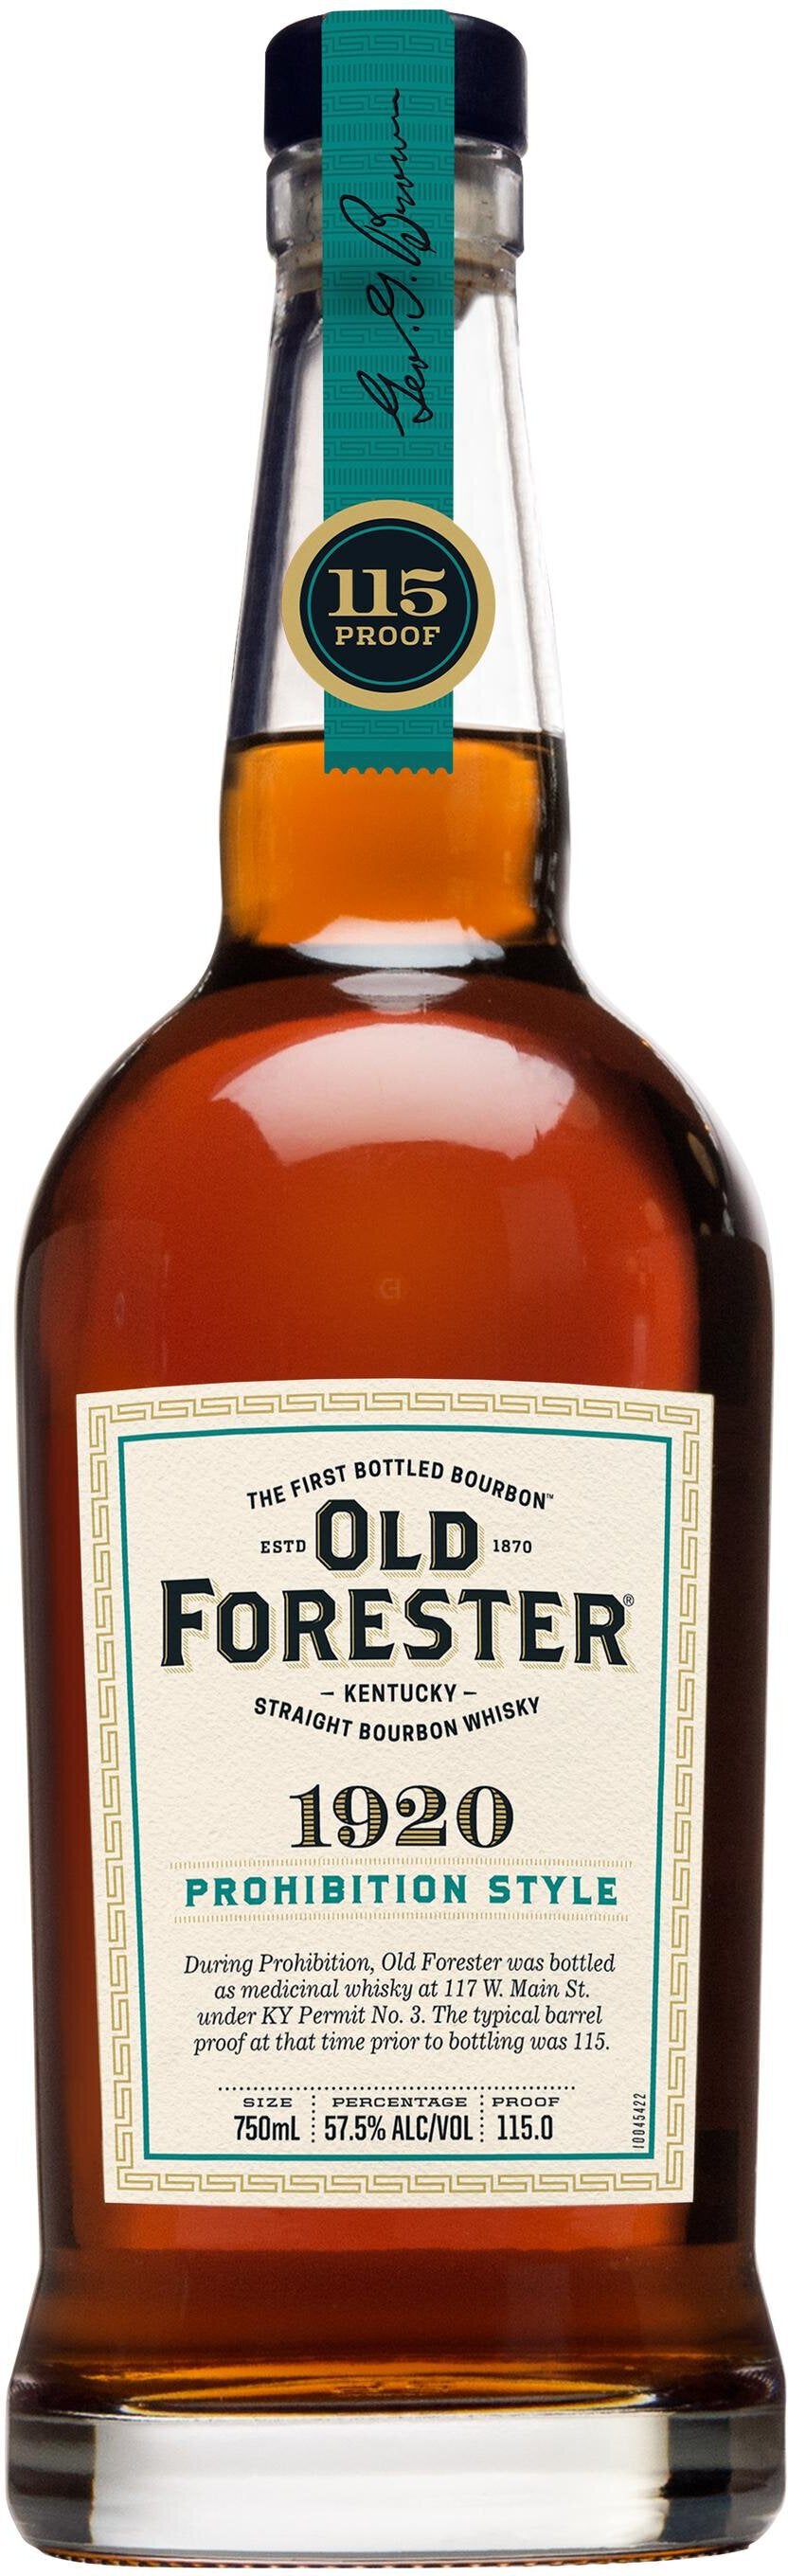 Old Forester 1920 Prohibition Style Kentucky Straight Bourbon Whisky 115 Proof